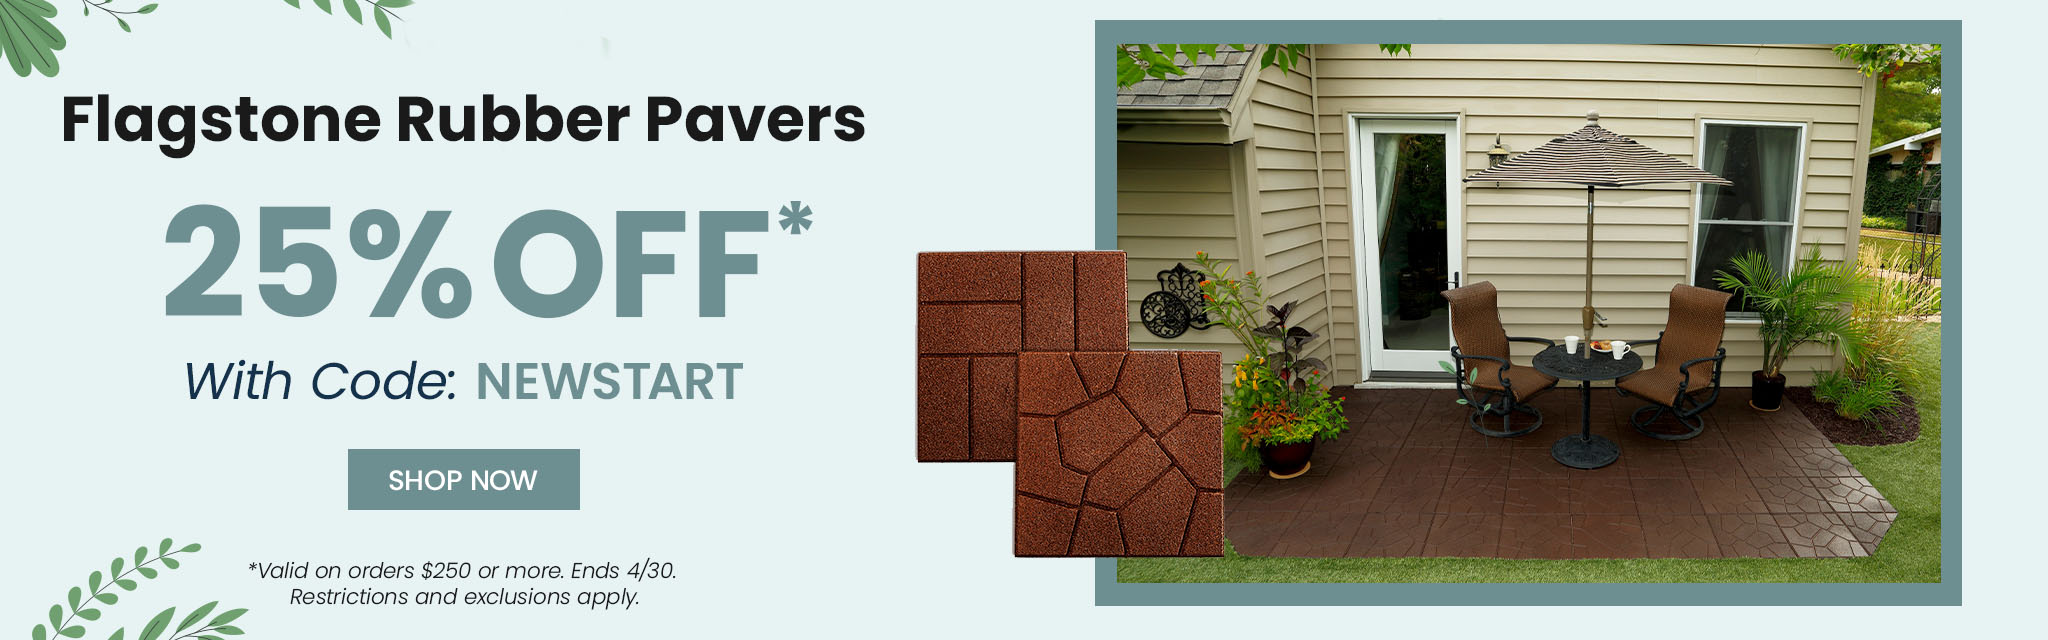 Flagstone Rubber Pavers. 25% Off With Code: NEWSTART. Shop Now. Valid on order $250 or more. Ends April 30th. Restrictions and exclusions apply.